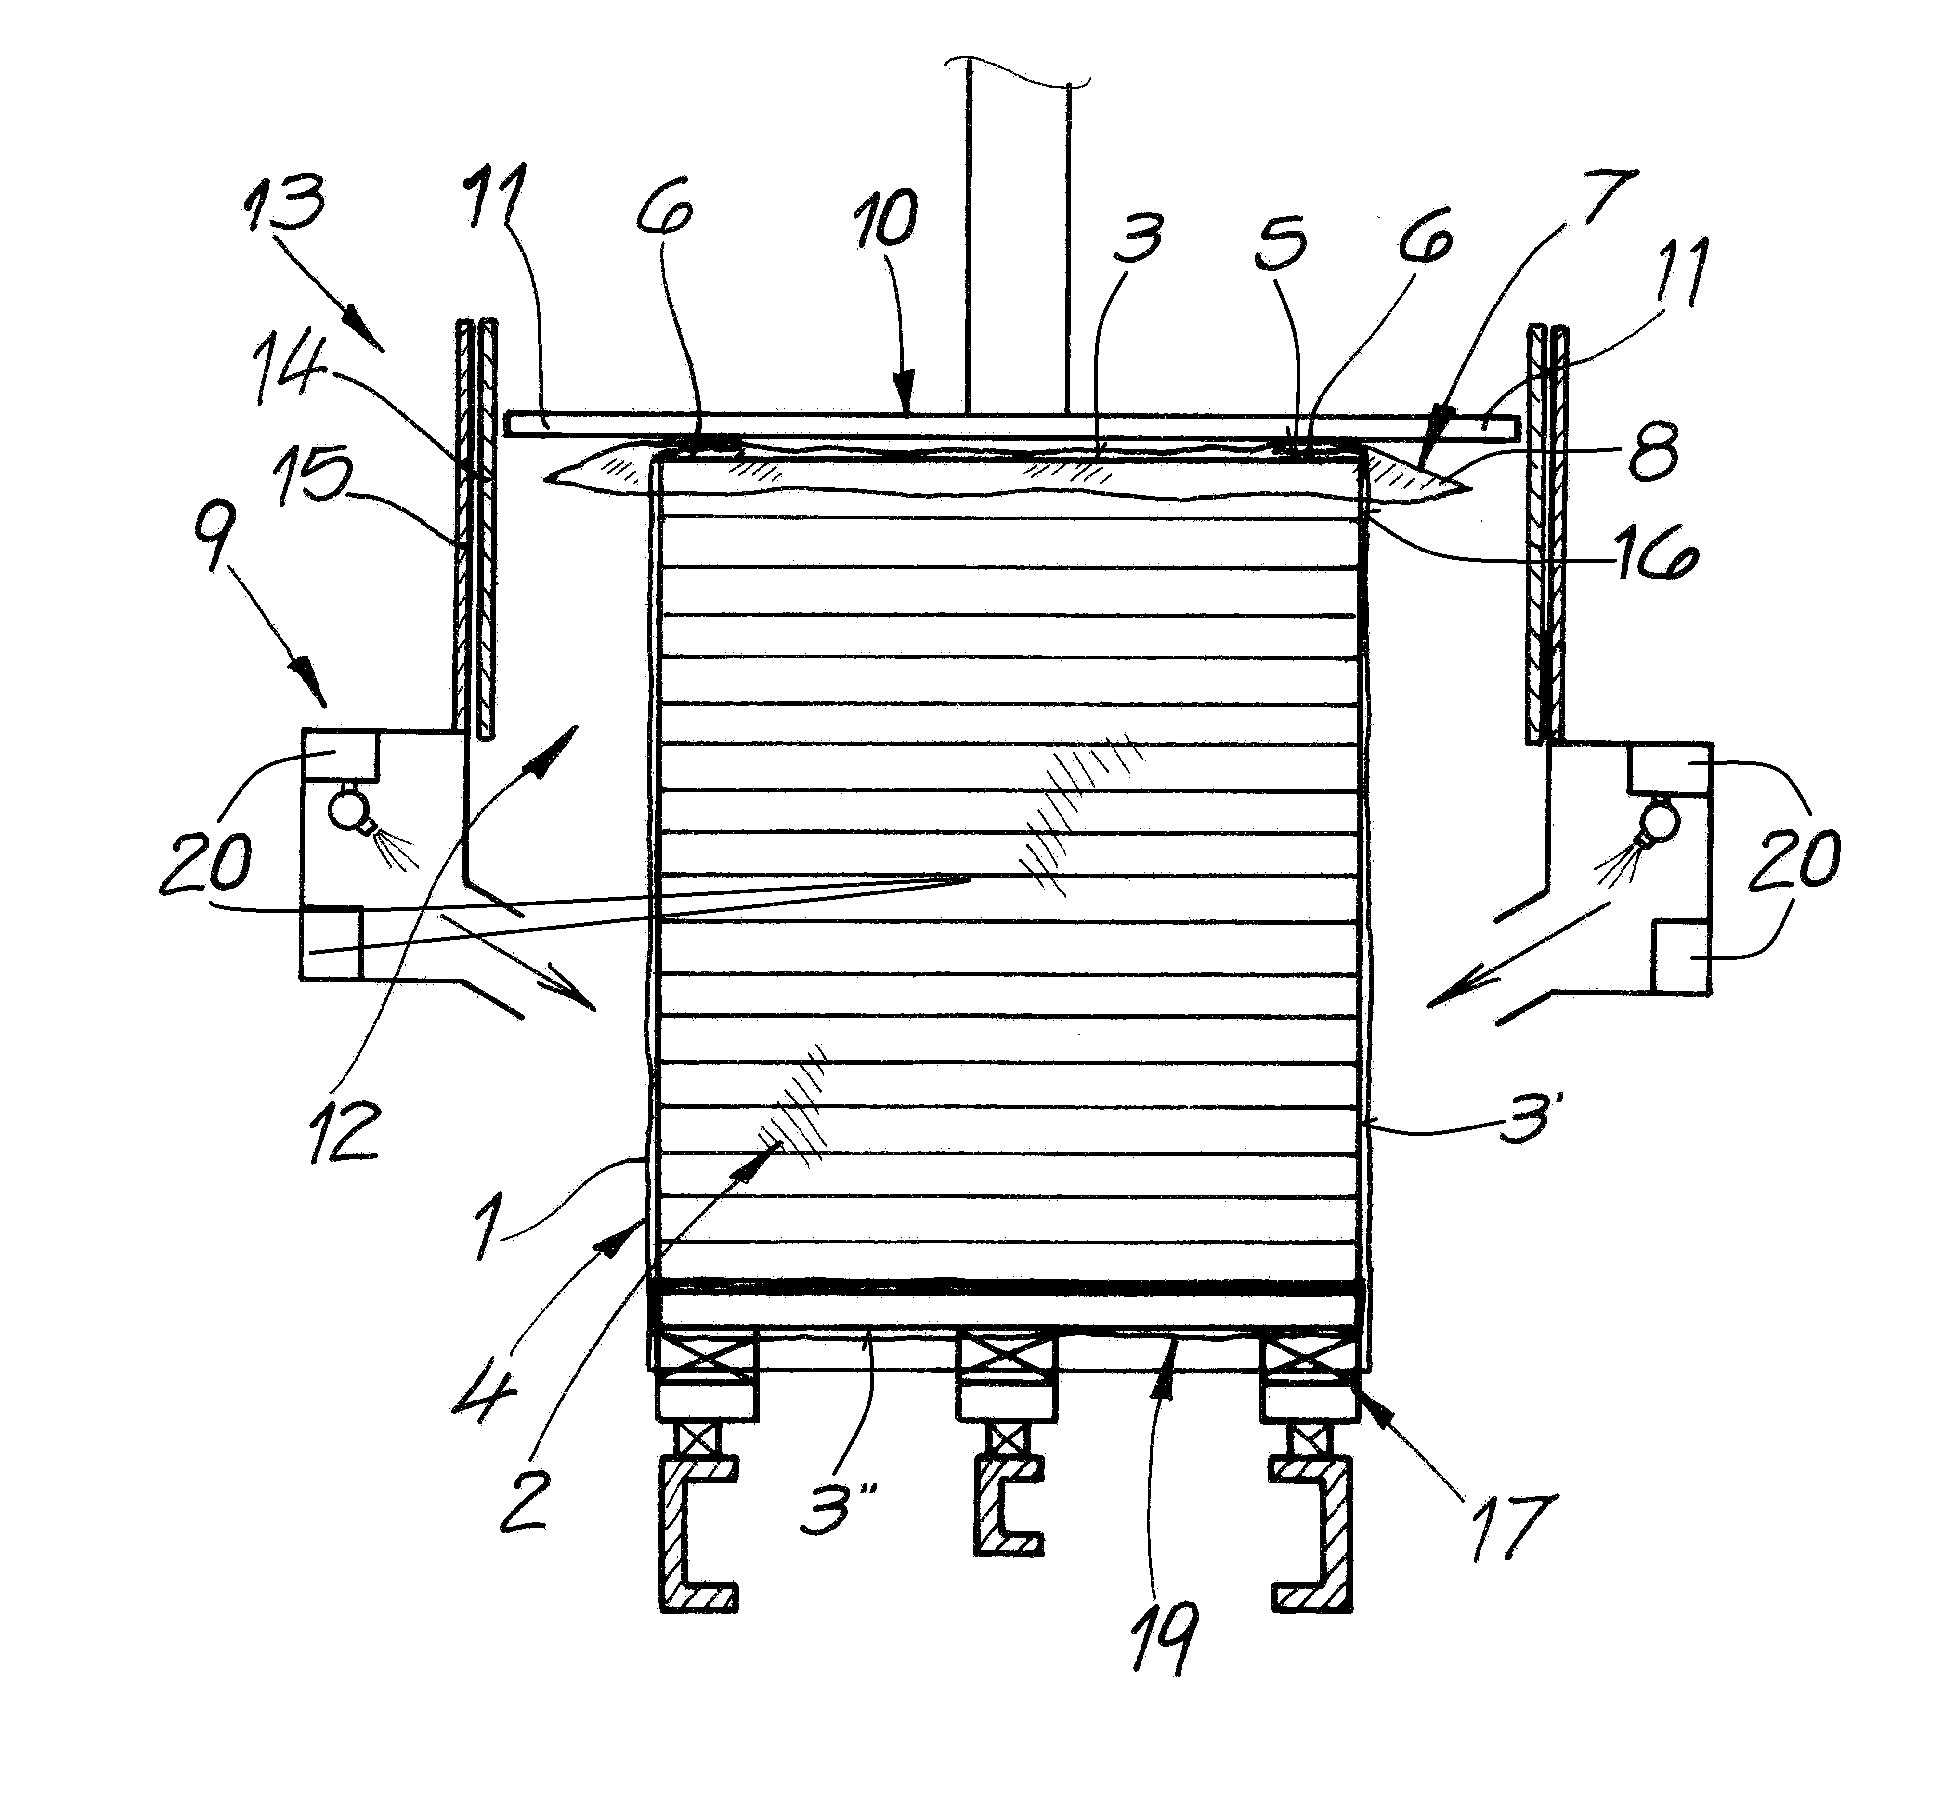 Method and apparatus for wrapping a film around an object